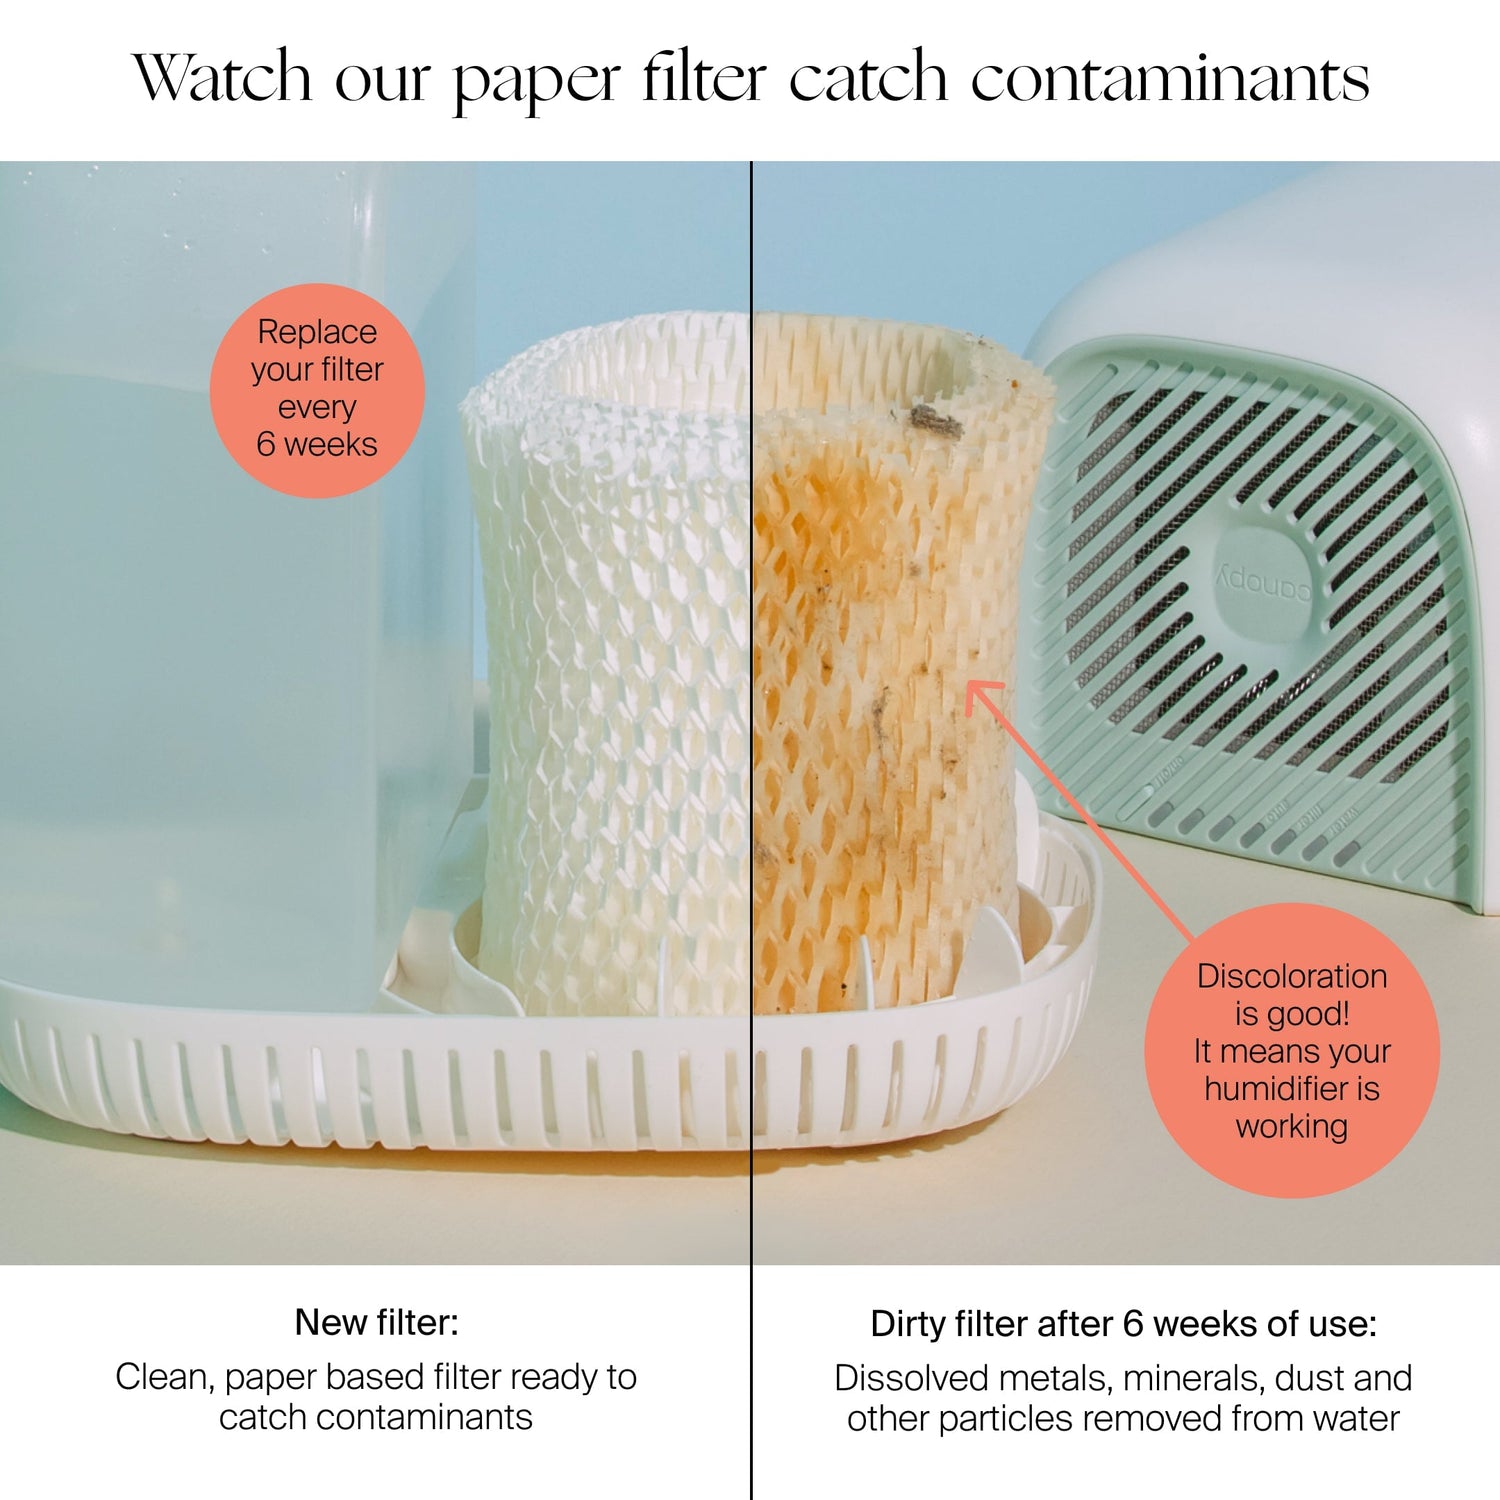 Bedside Humidifier | Lifestyle, Watch our paper filter catch contaminants